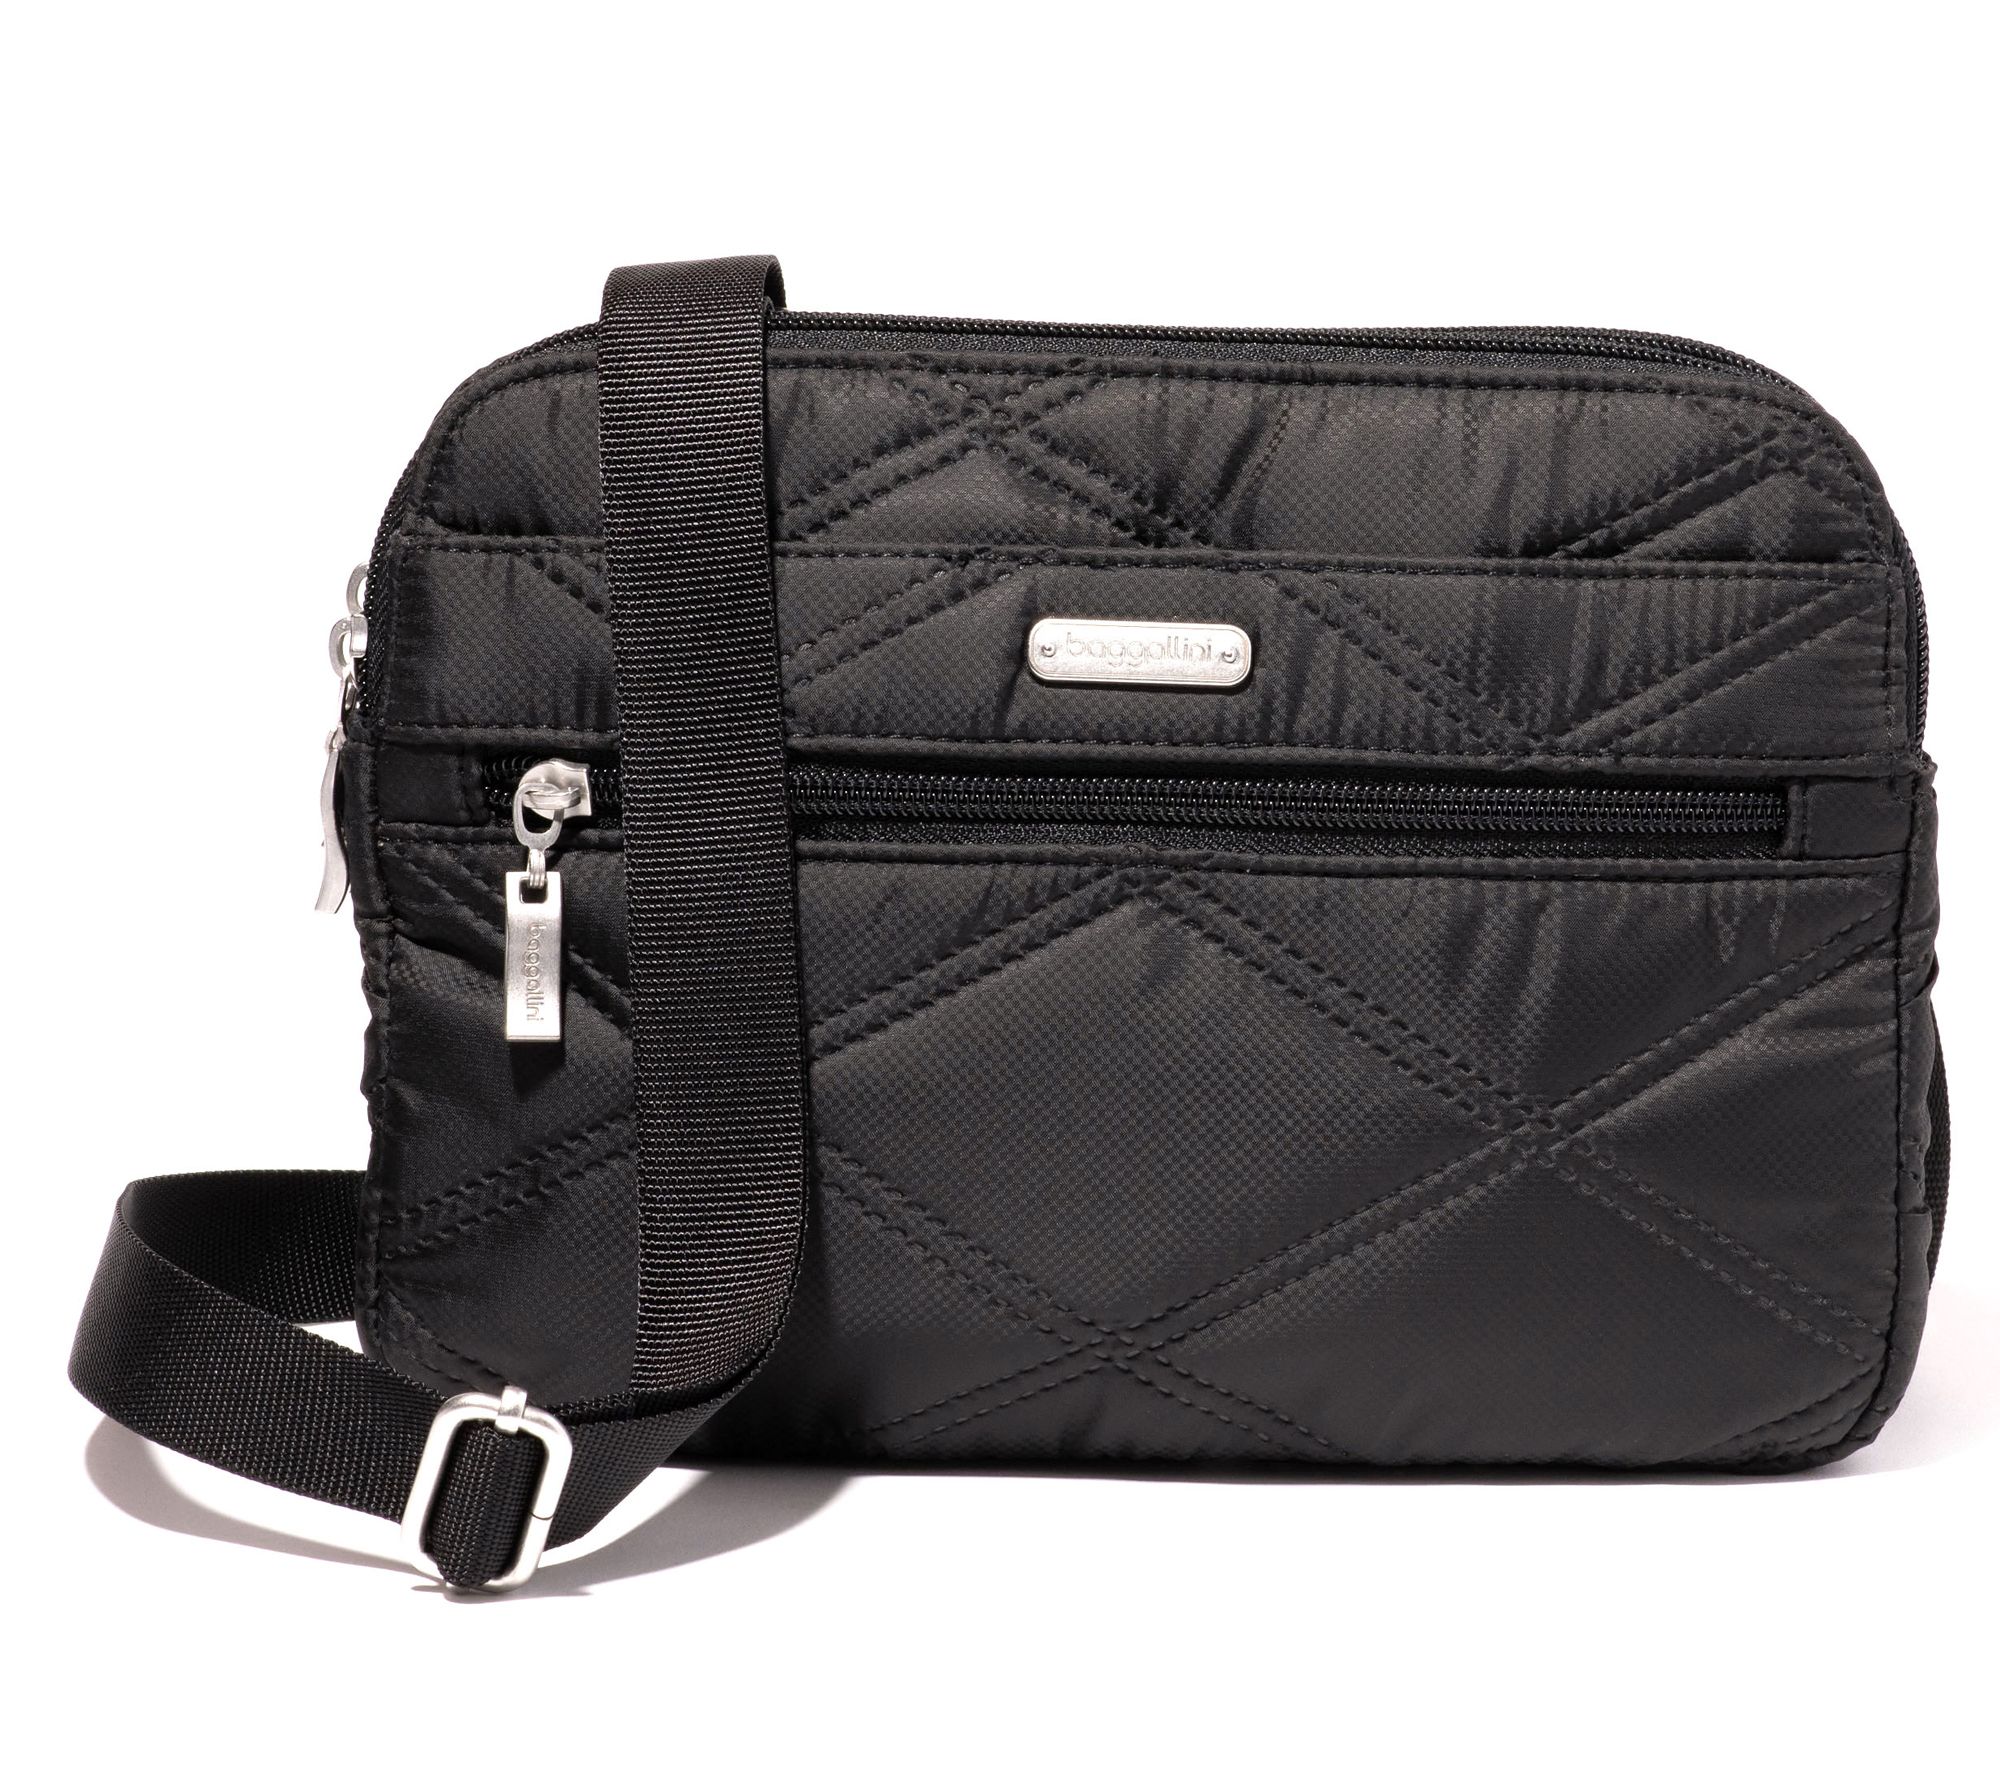 Baggallini Dome Crossbody with Braided Strap ,Black